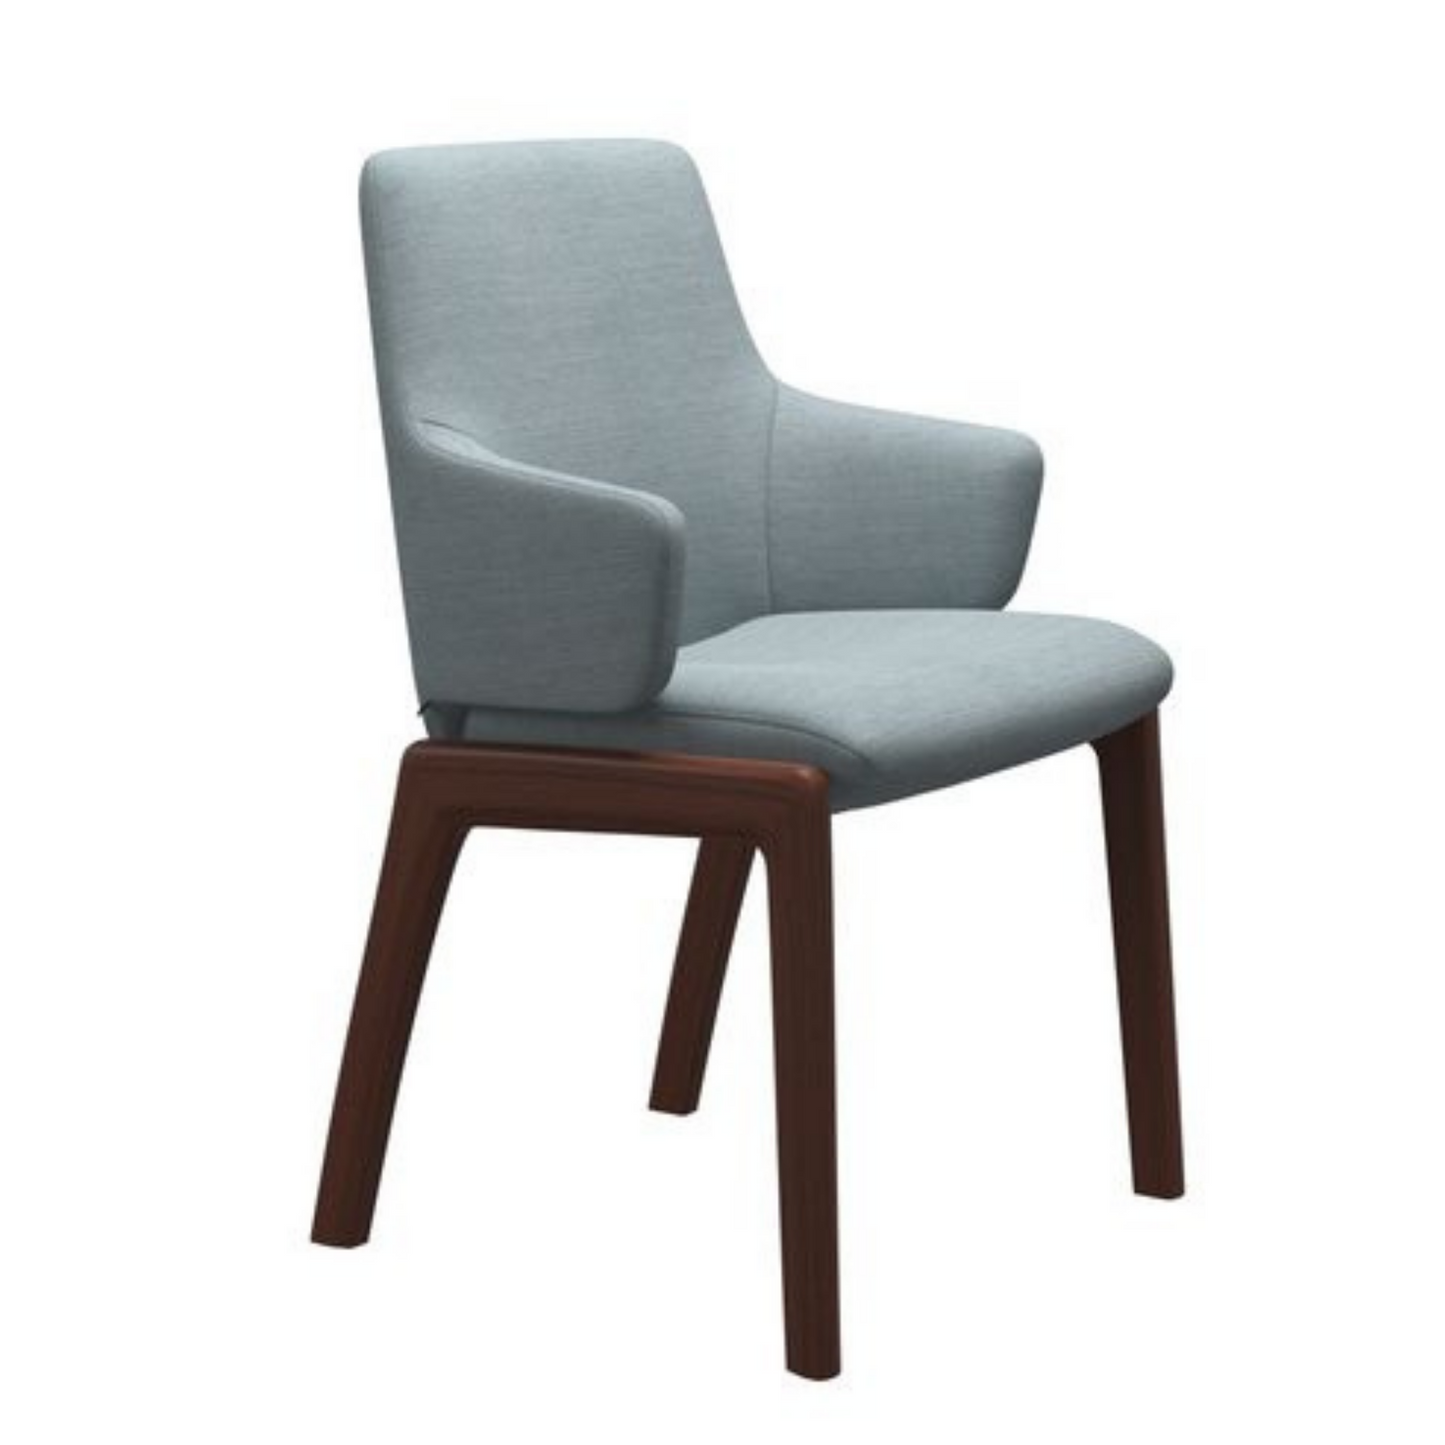 Laurel Dining Chair with Arms D100 Leg by Stressless